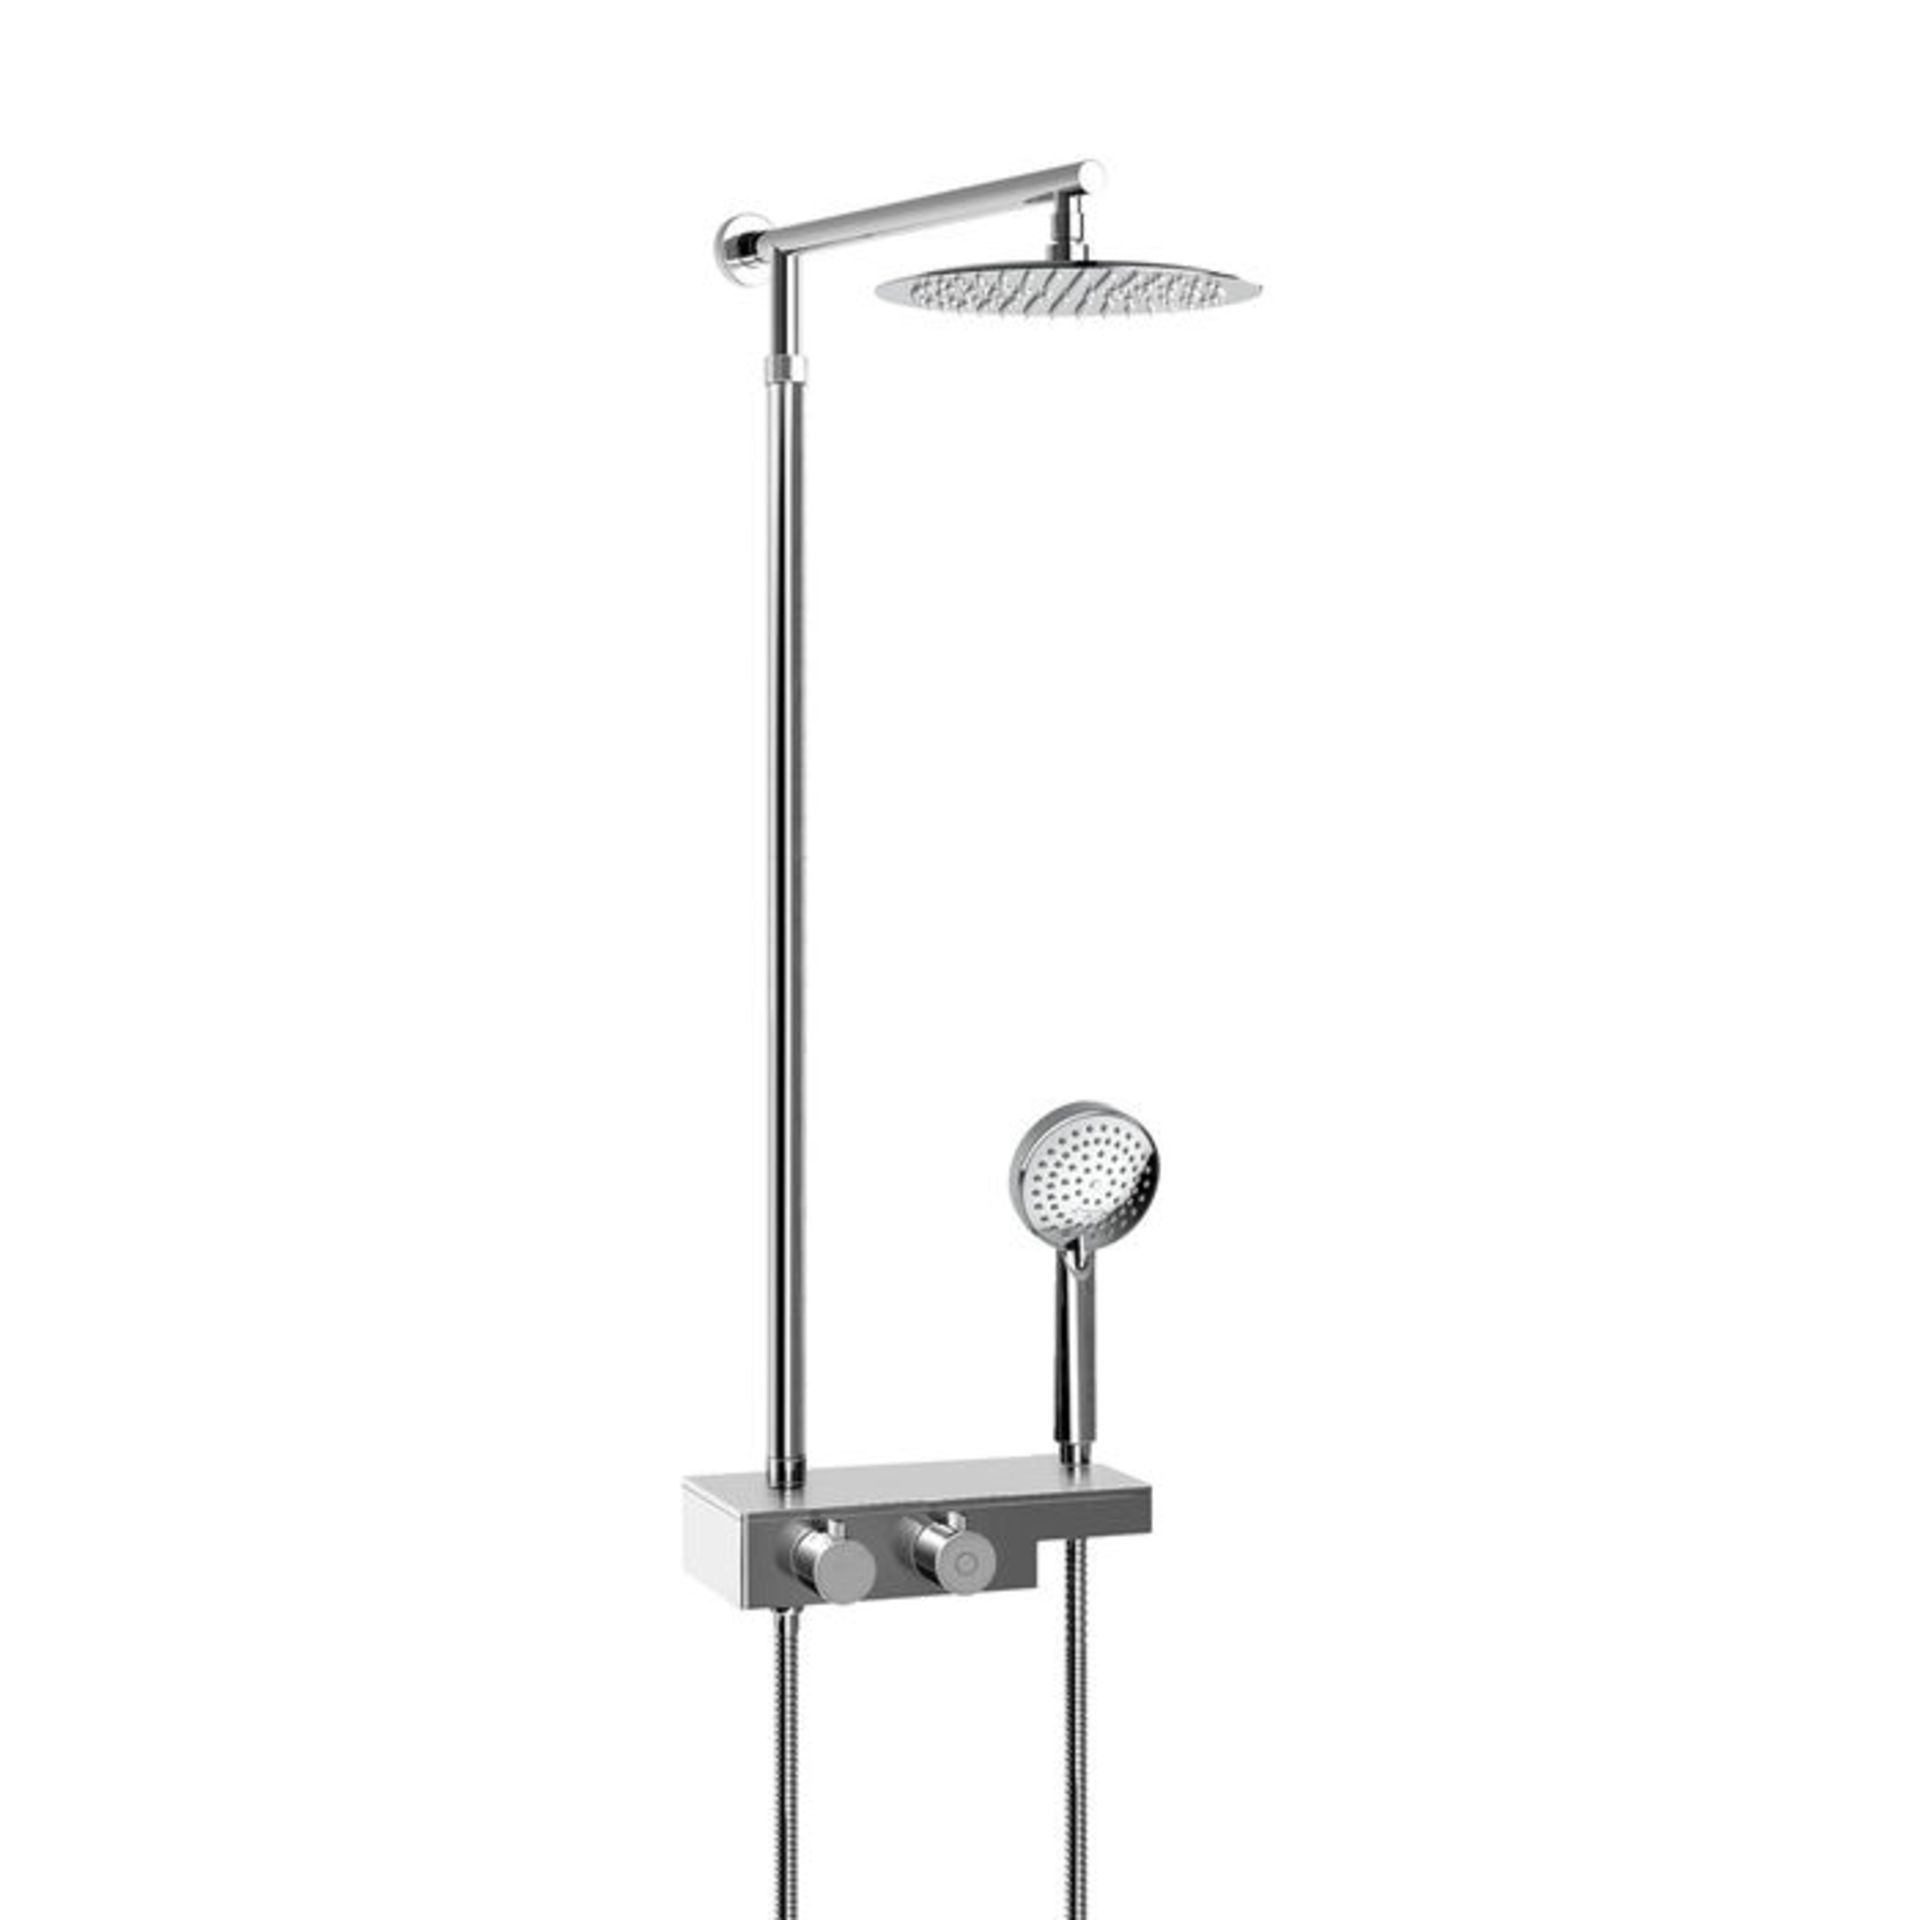 (AA103) Round Exposed Thermostatic Mixer Shower Kit & Large Head. RRP £349.99. Cool to touch s... - Image 2 of 3